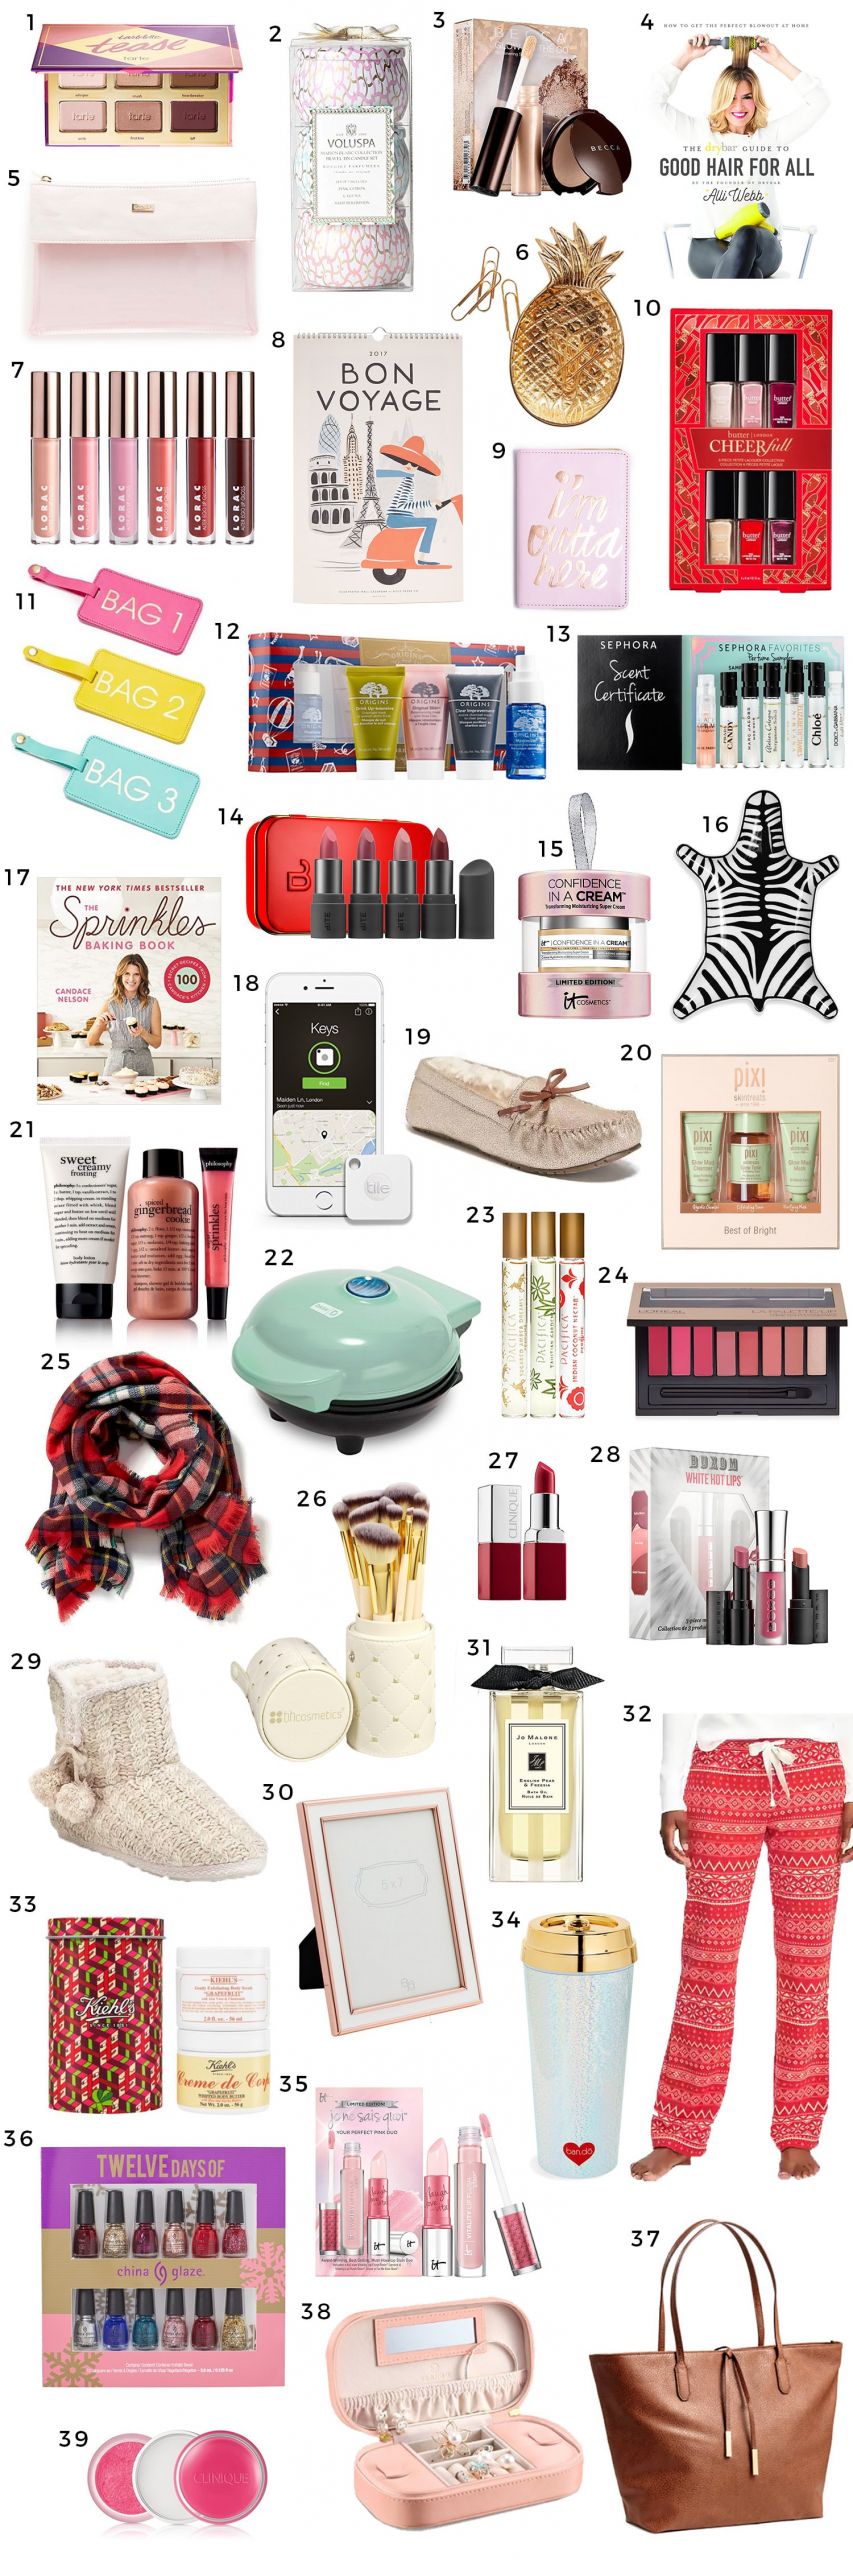 Great Holiday Gift Ideas
 The Best Christmas Gift Ideas for Women under $25